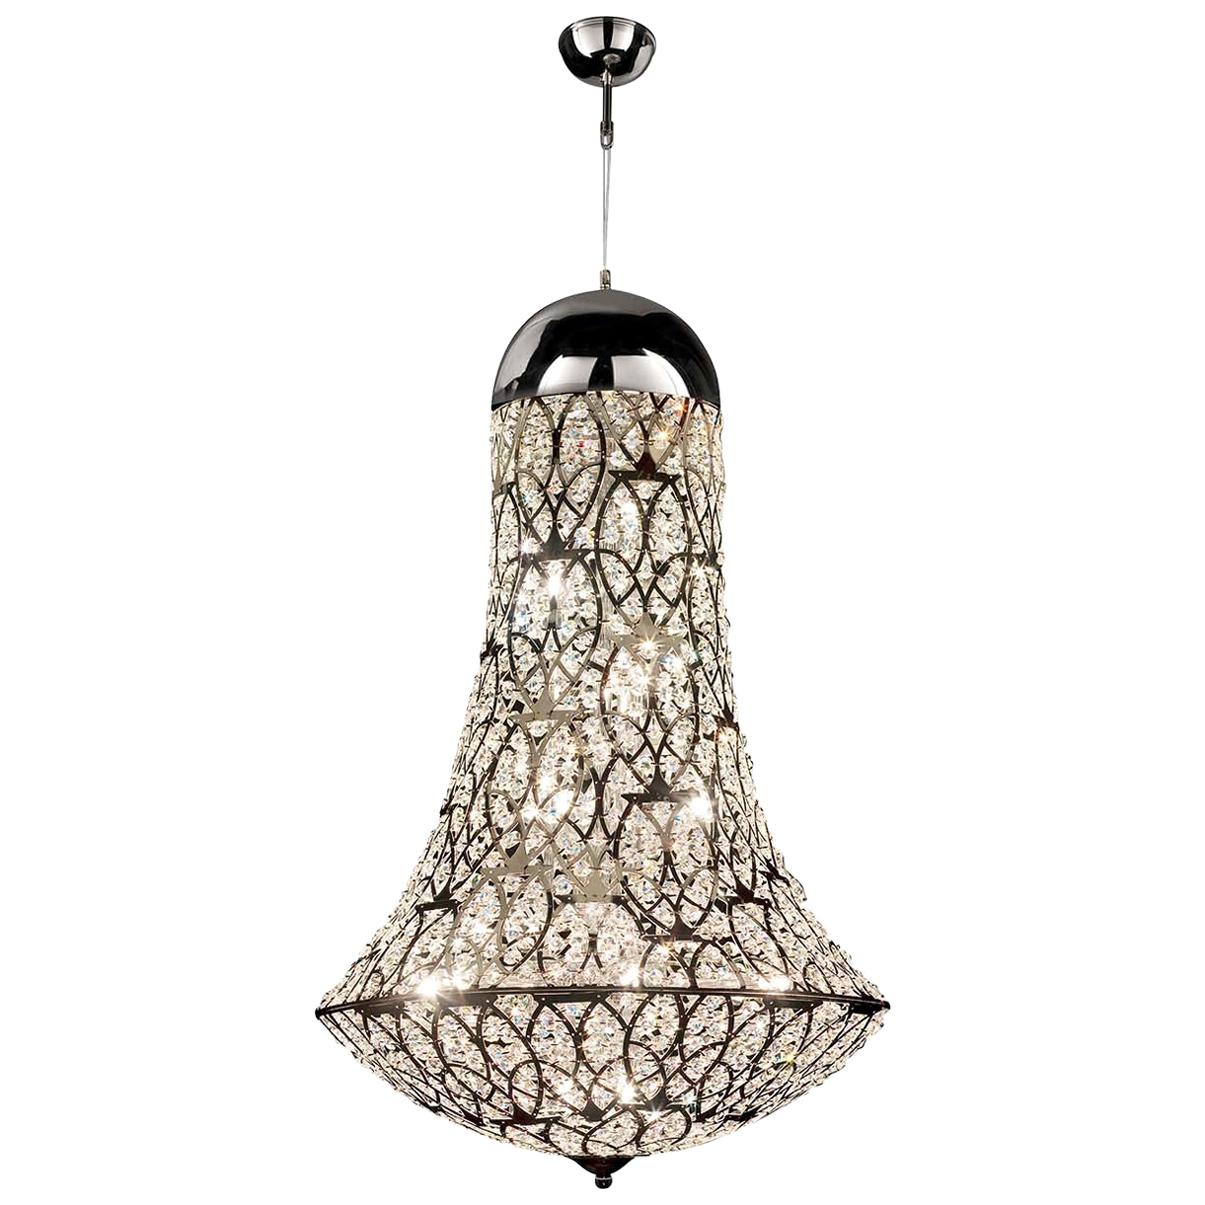 Arabesque Exclamation Small Pendant Lamp